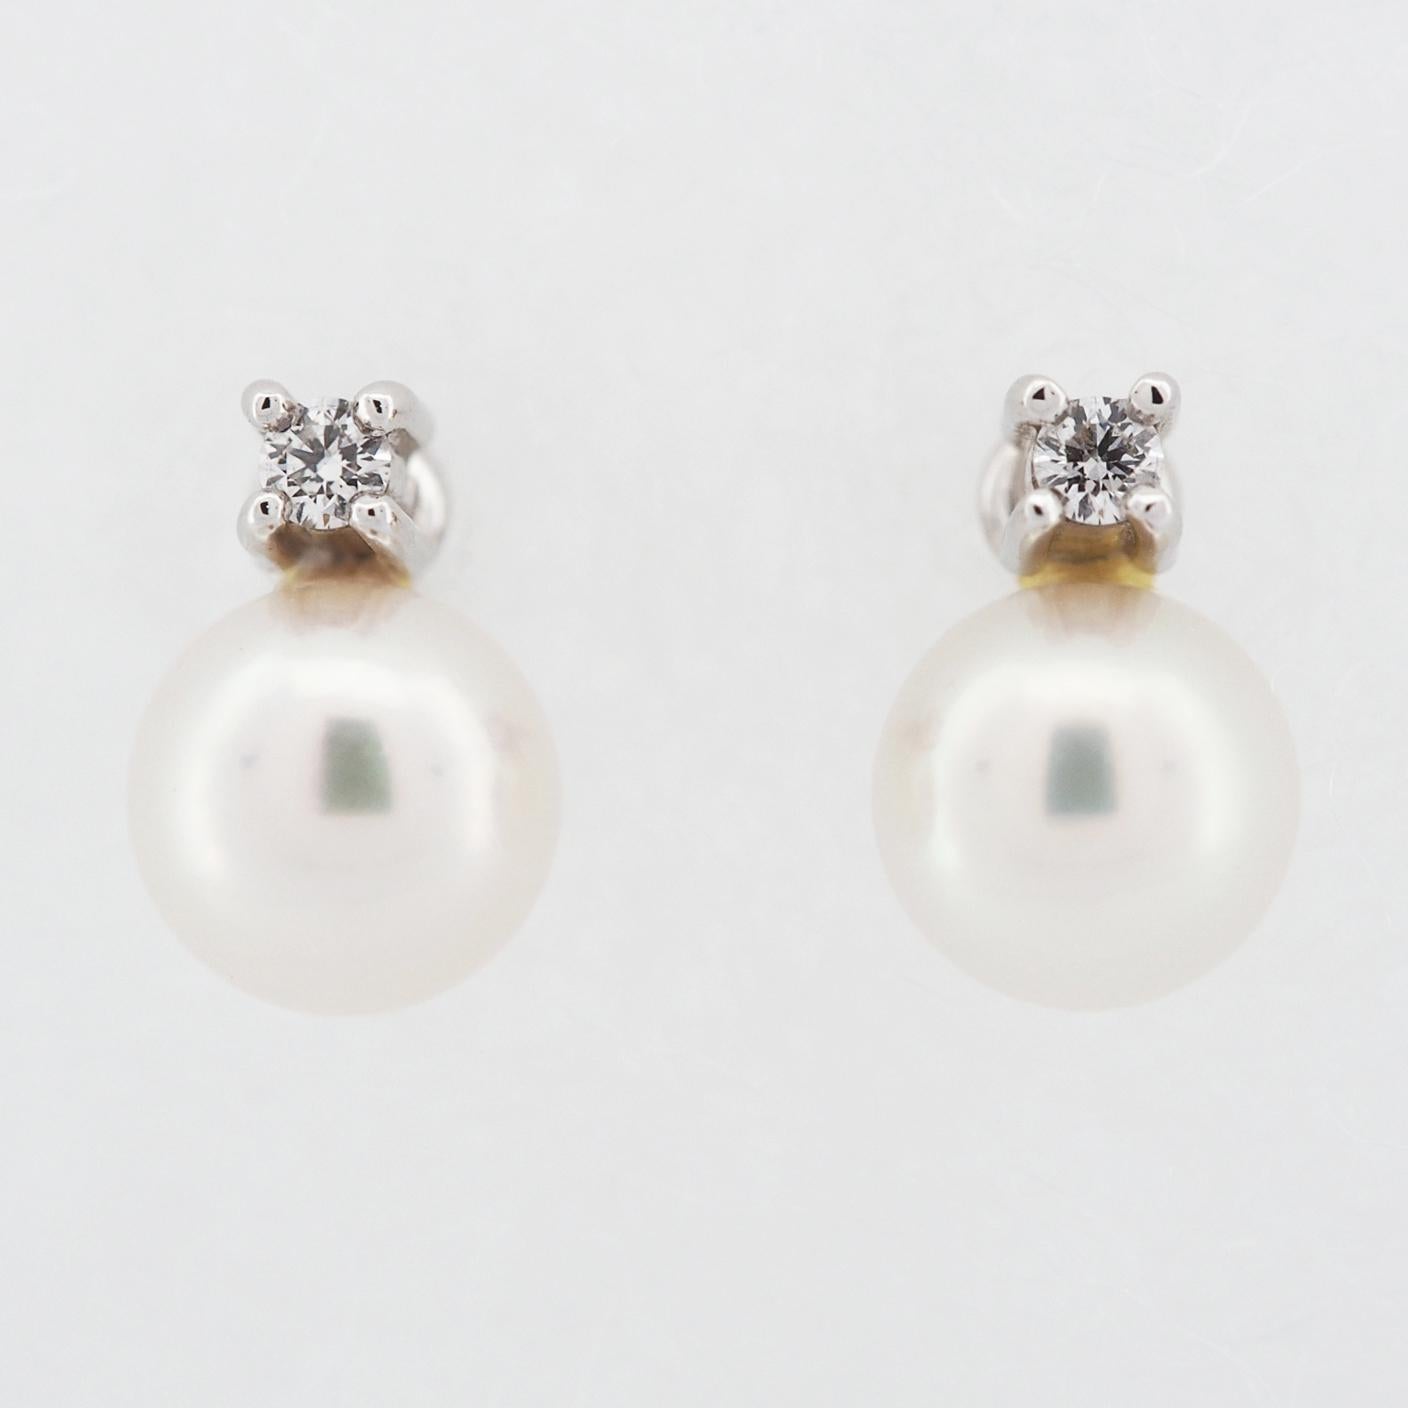 Item: Mikimoto Akoya Pearl Post Earrings
Stones: 5 mm Akoya Pearl / Diamond (0.02ct × 2)
Metal: 18K White Gold
Measurement: 0.7 cm
Weight: 1.6 Grams (total)
Condition: Used
Retail Price: ---
Signatures: MIKIMOTO, K18
Accessories: ---

These are